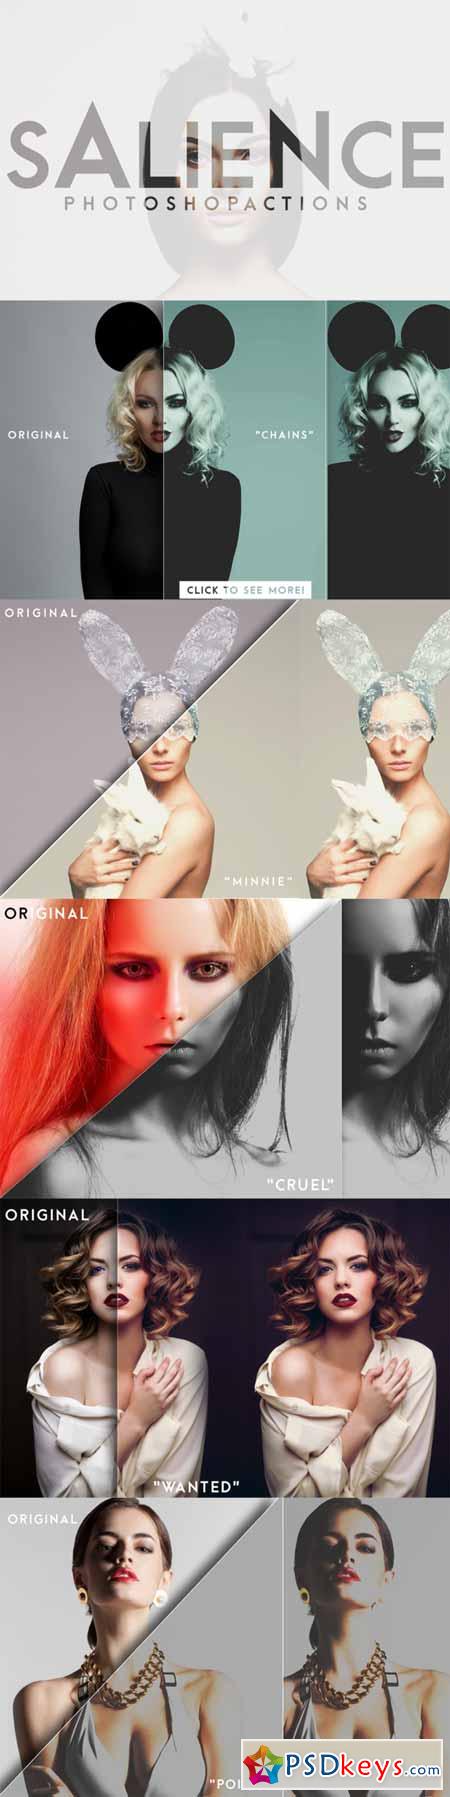 Salience Photoshop Actions 236067